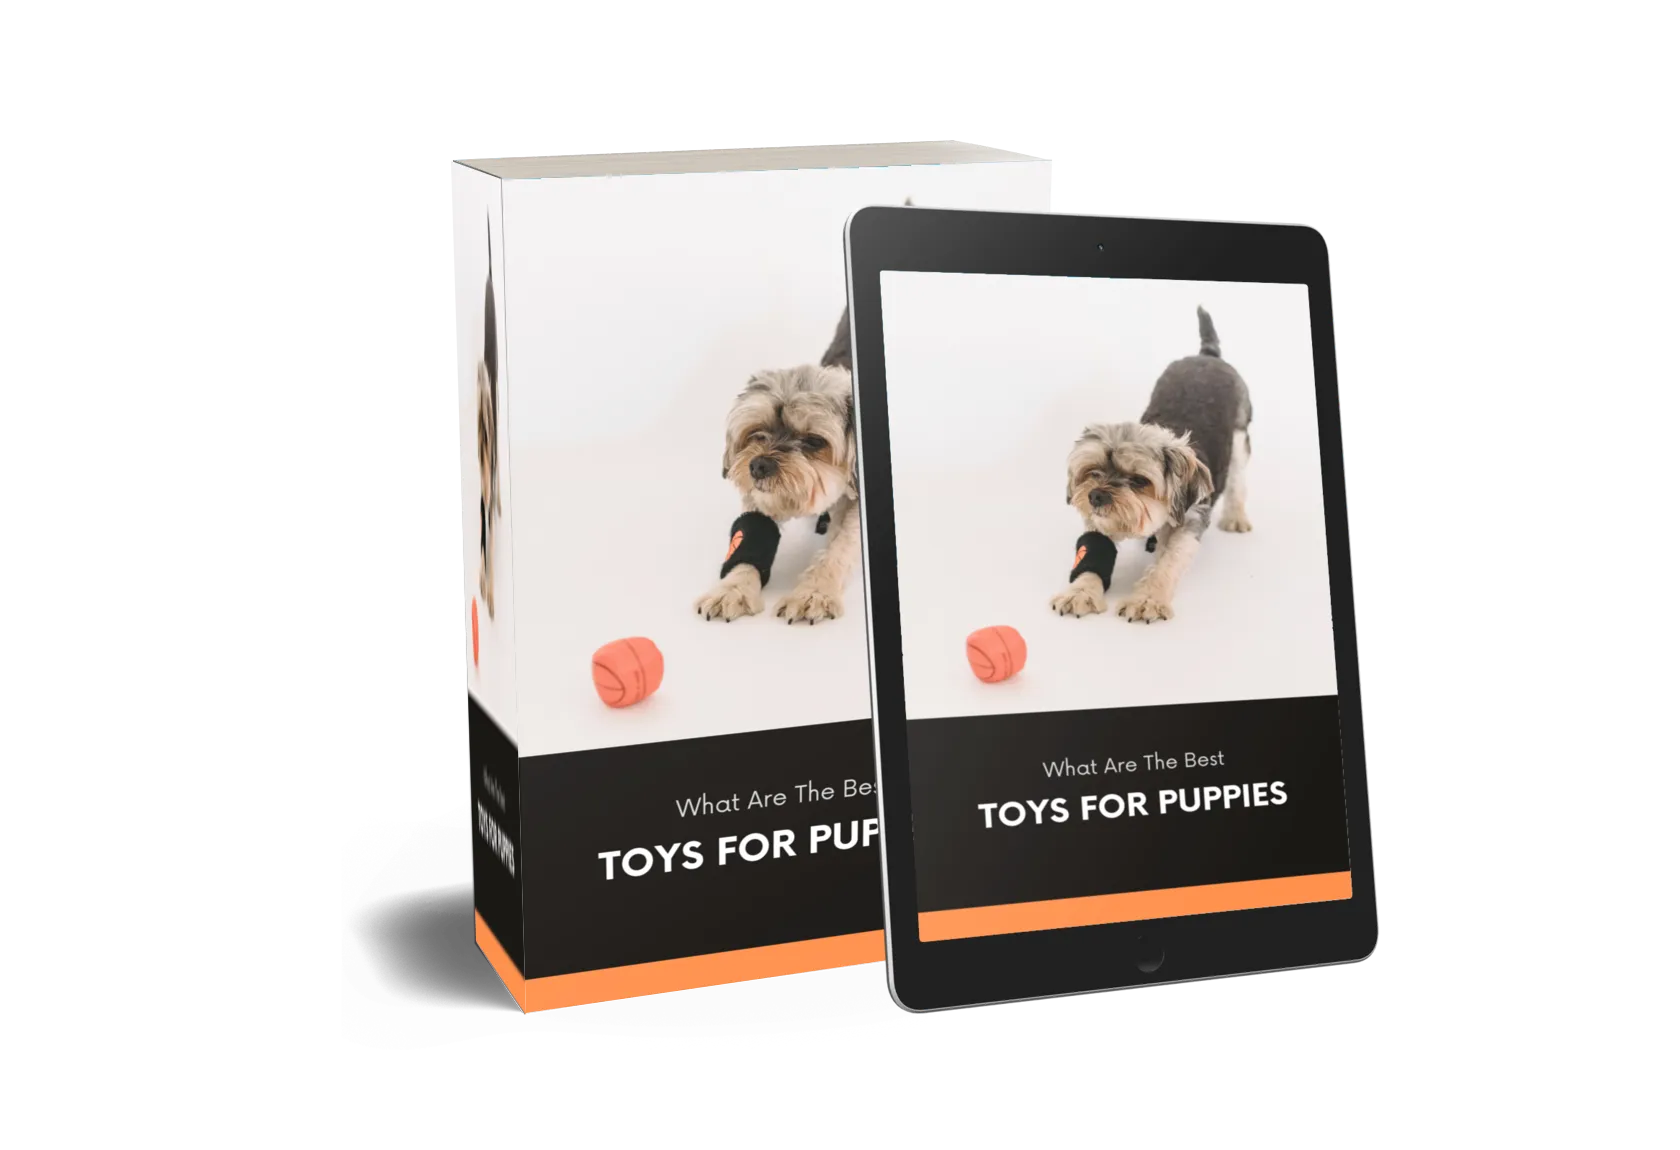 What Are The Best Toys for Puppies